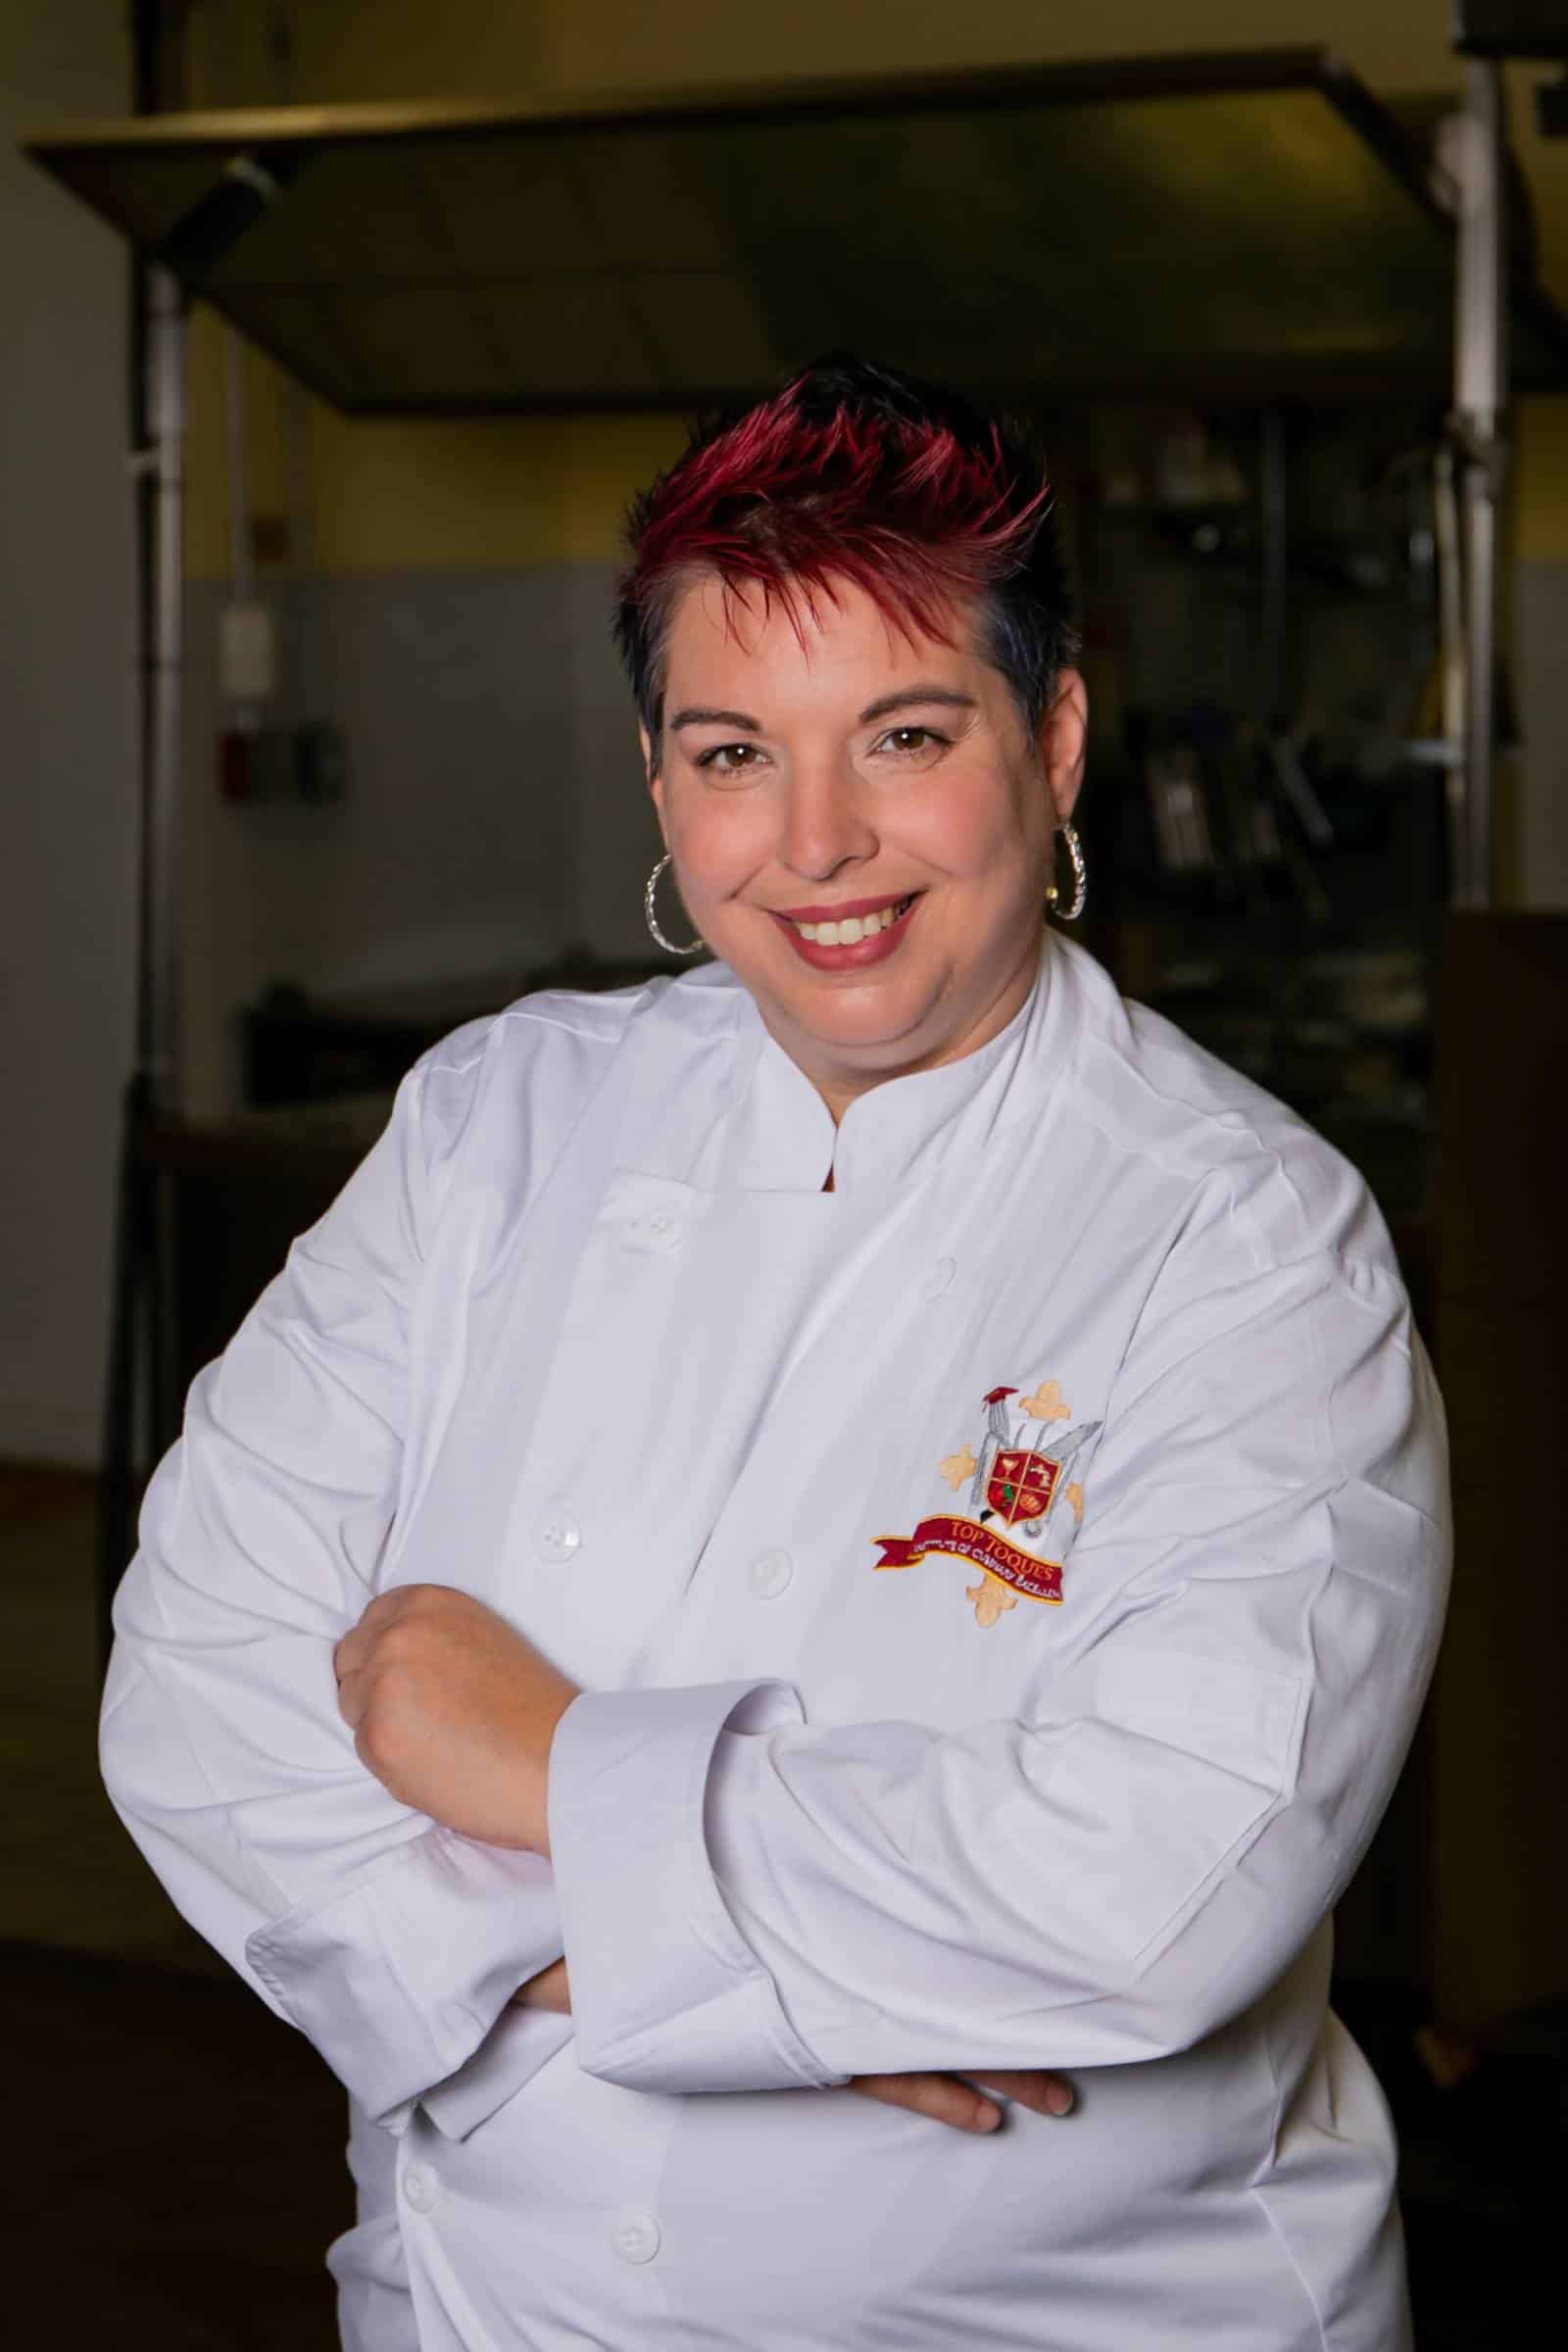 Chef Nicole Puffer - Image - Top Toques Institute of Culinary Excellence